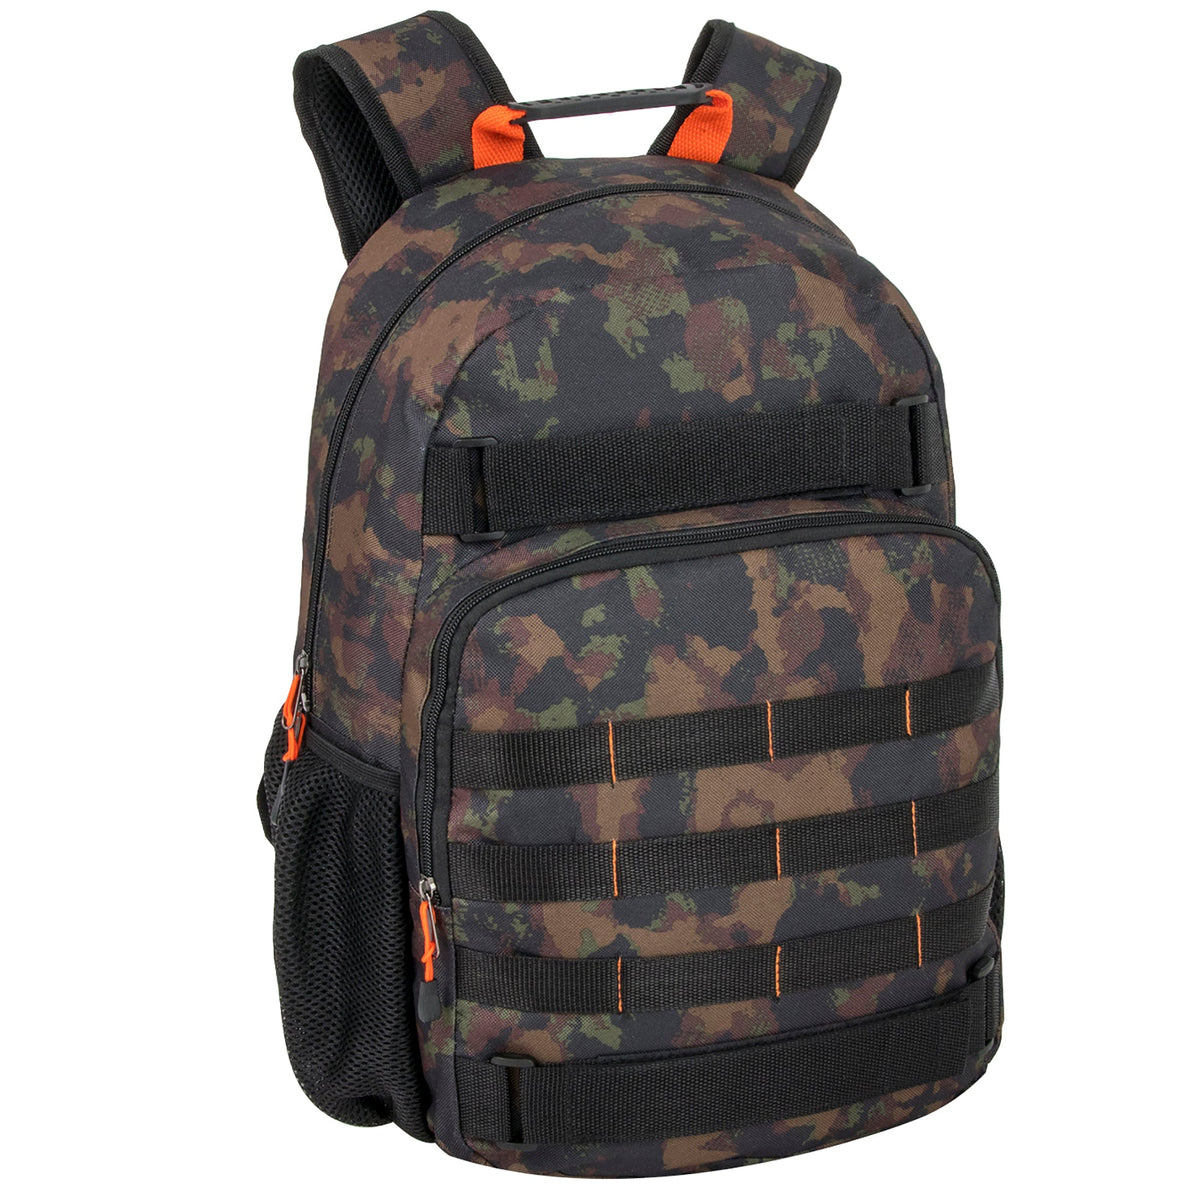 19 Inch Dual Strap Daisy Chain Backpack With Laptop Sleeve - Camo ( 1 Case=24Pcs) 15.4$/PC